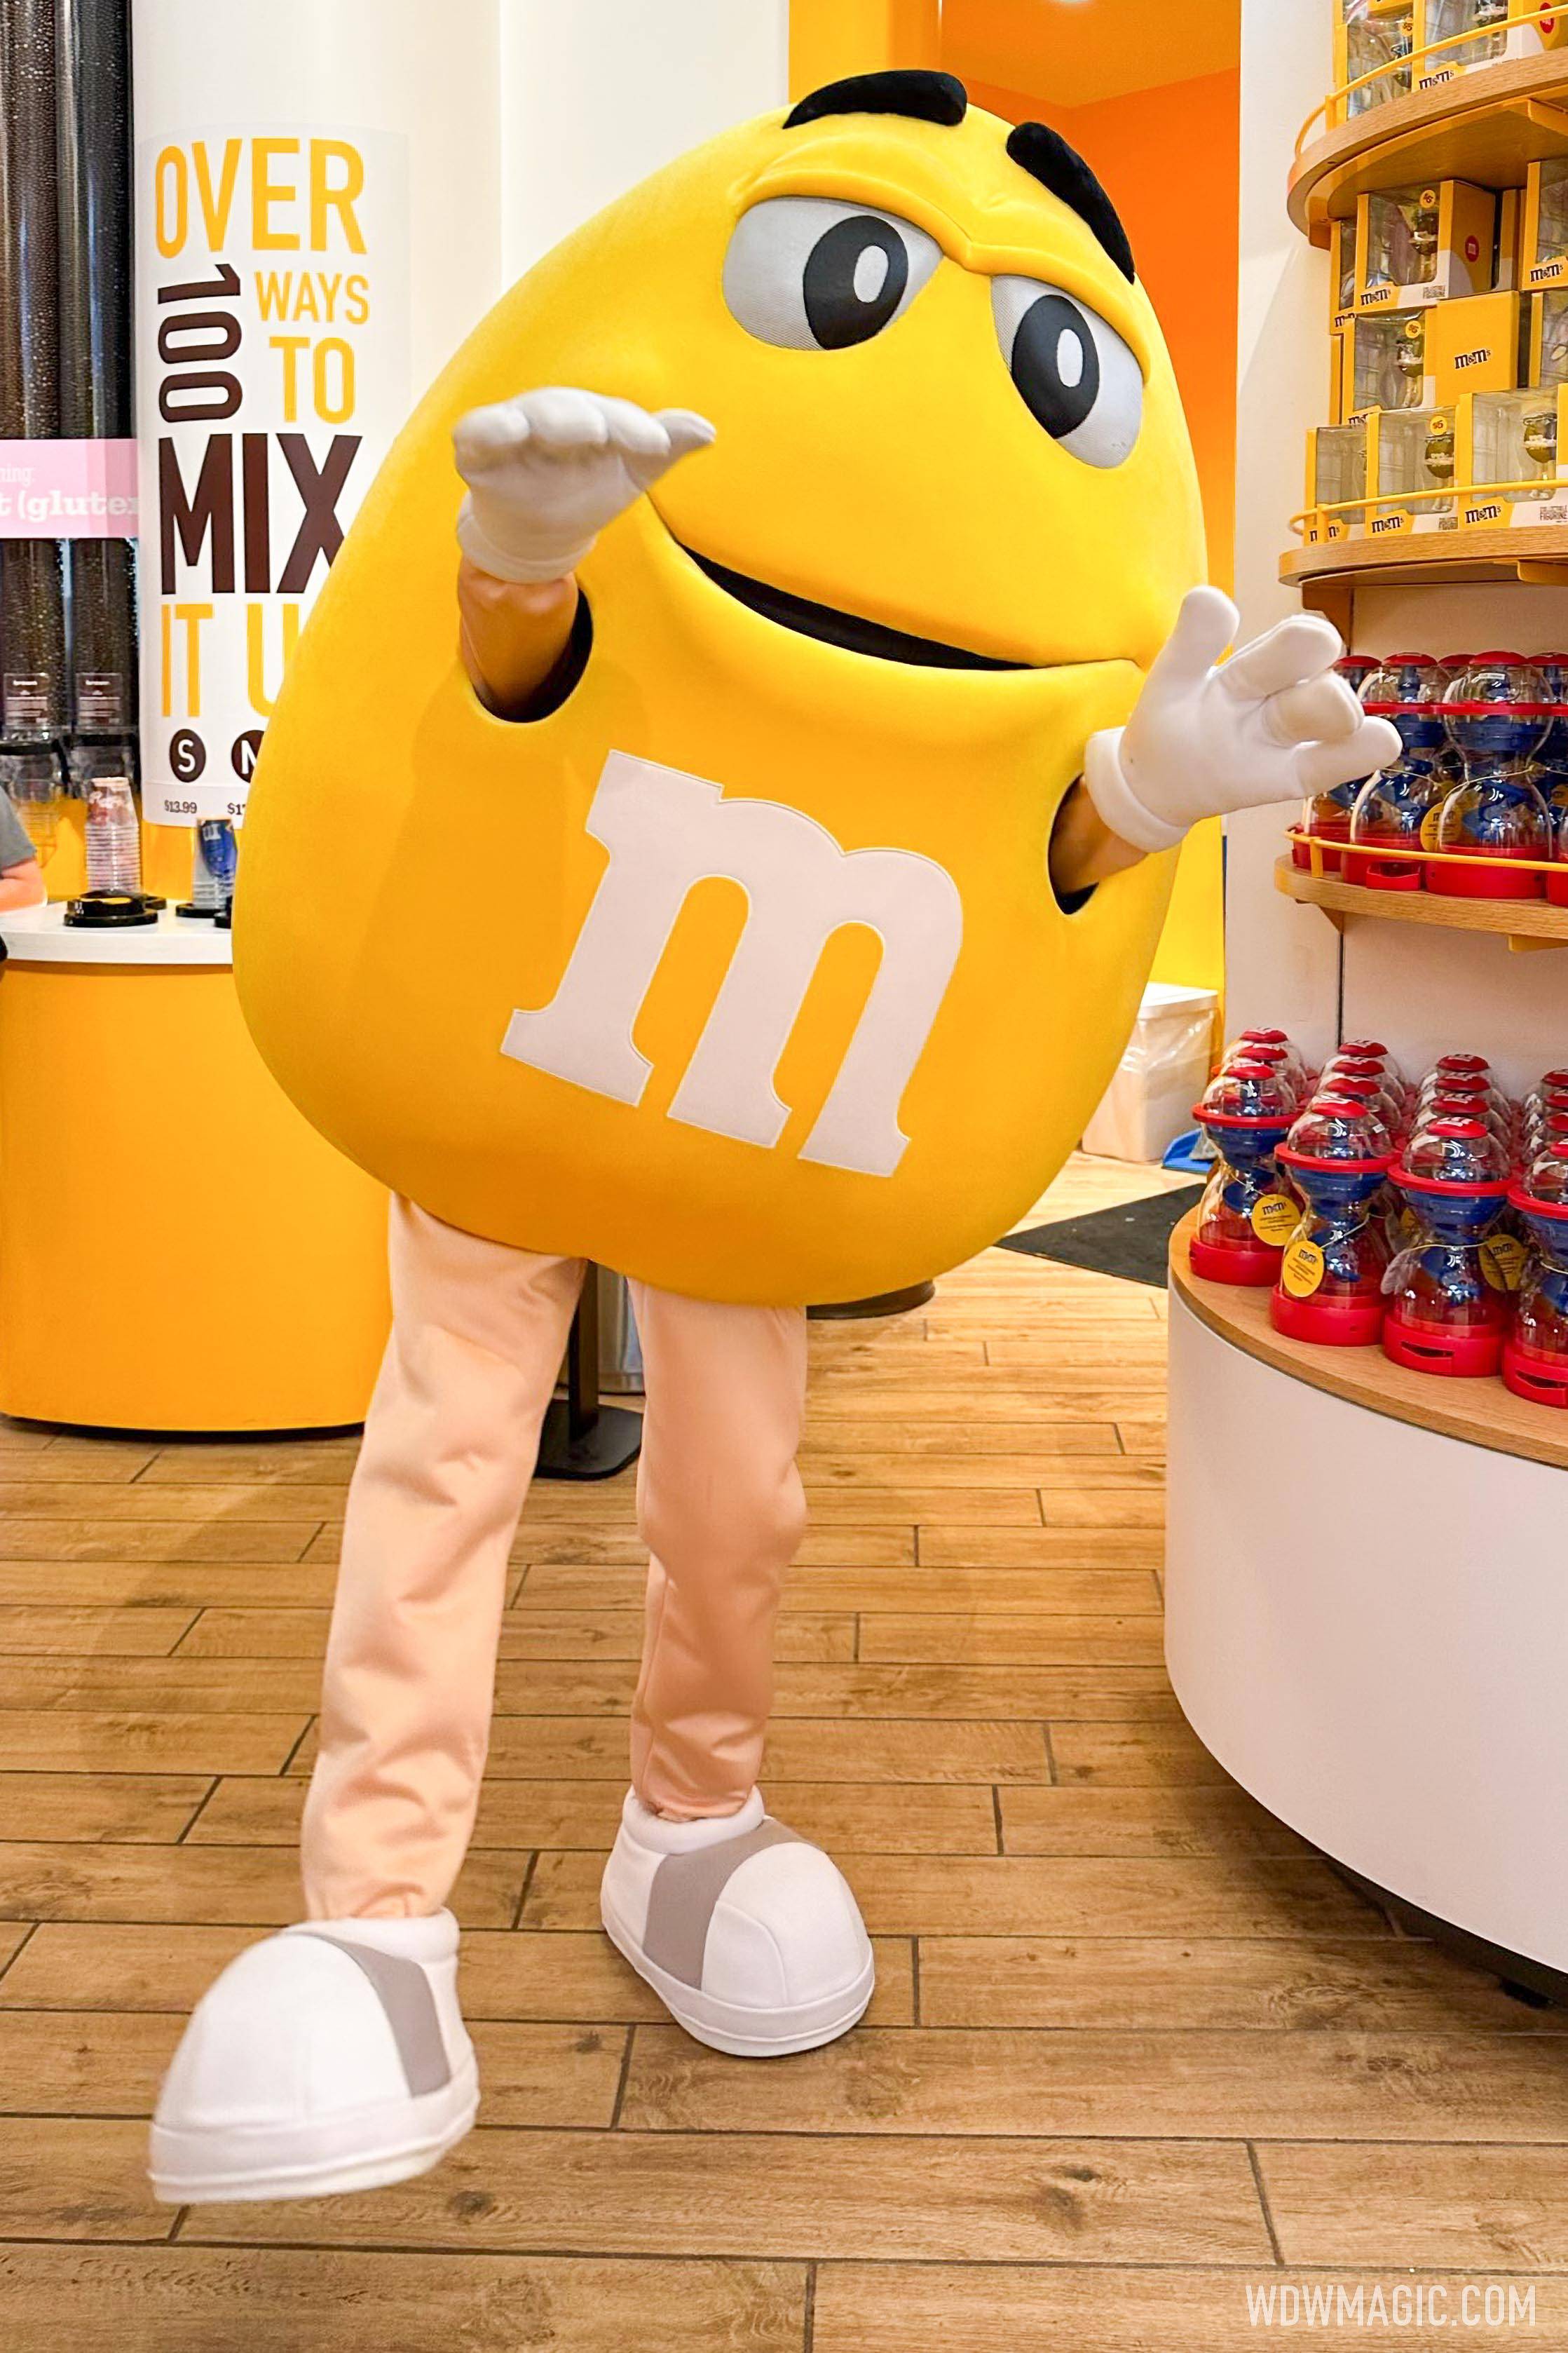 Meet the Lovely M&M's Characters